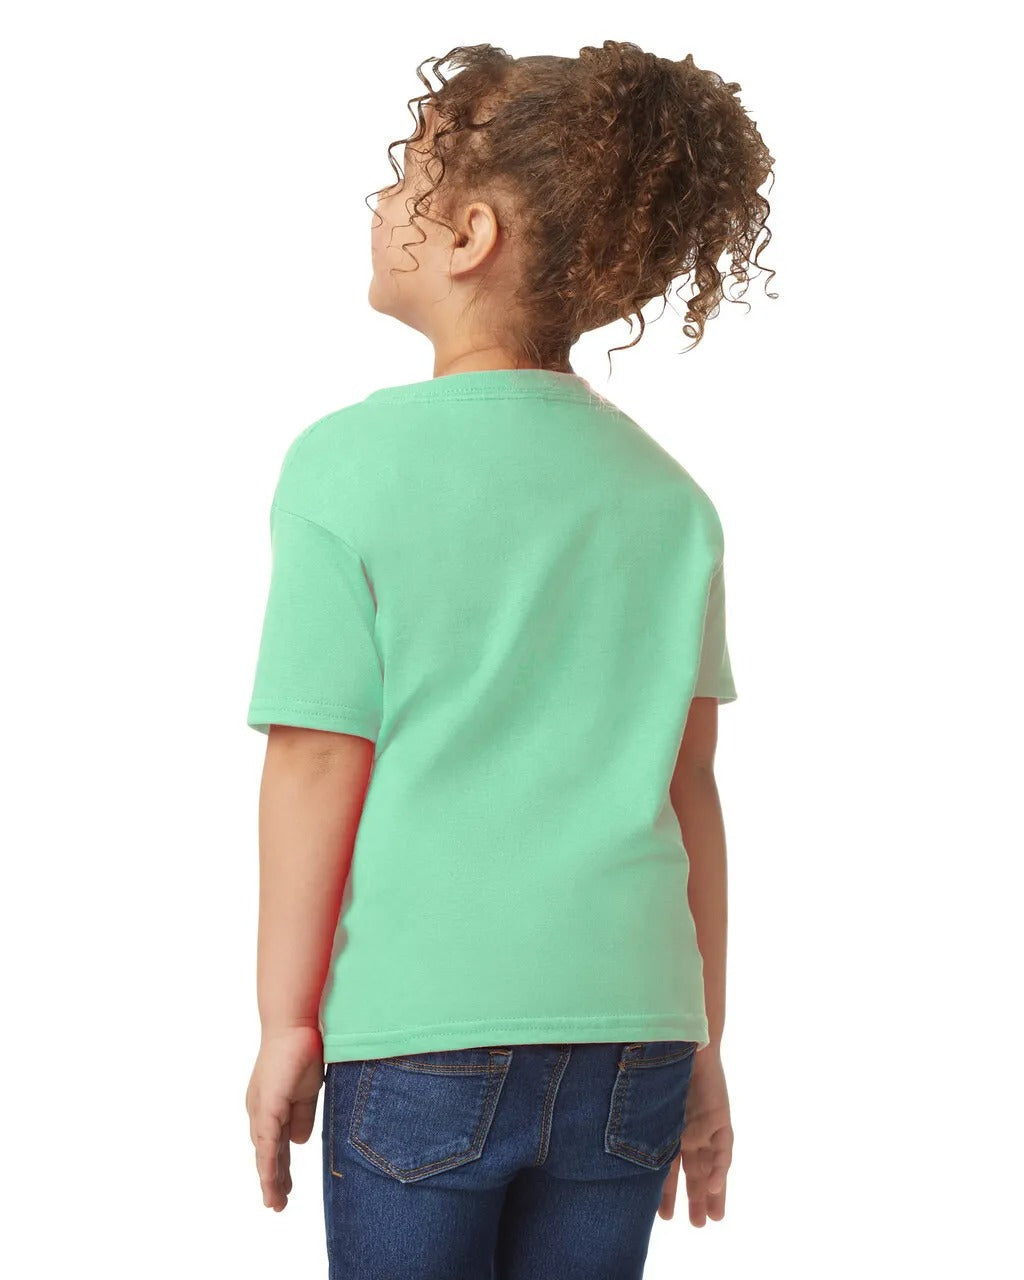 Toddlers Tshirt - Mint Green